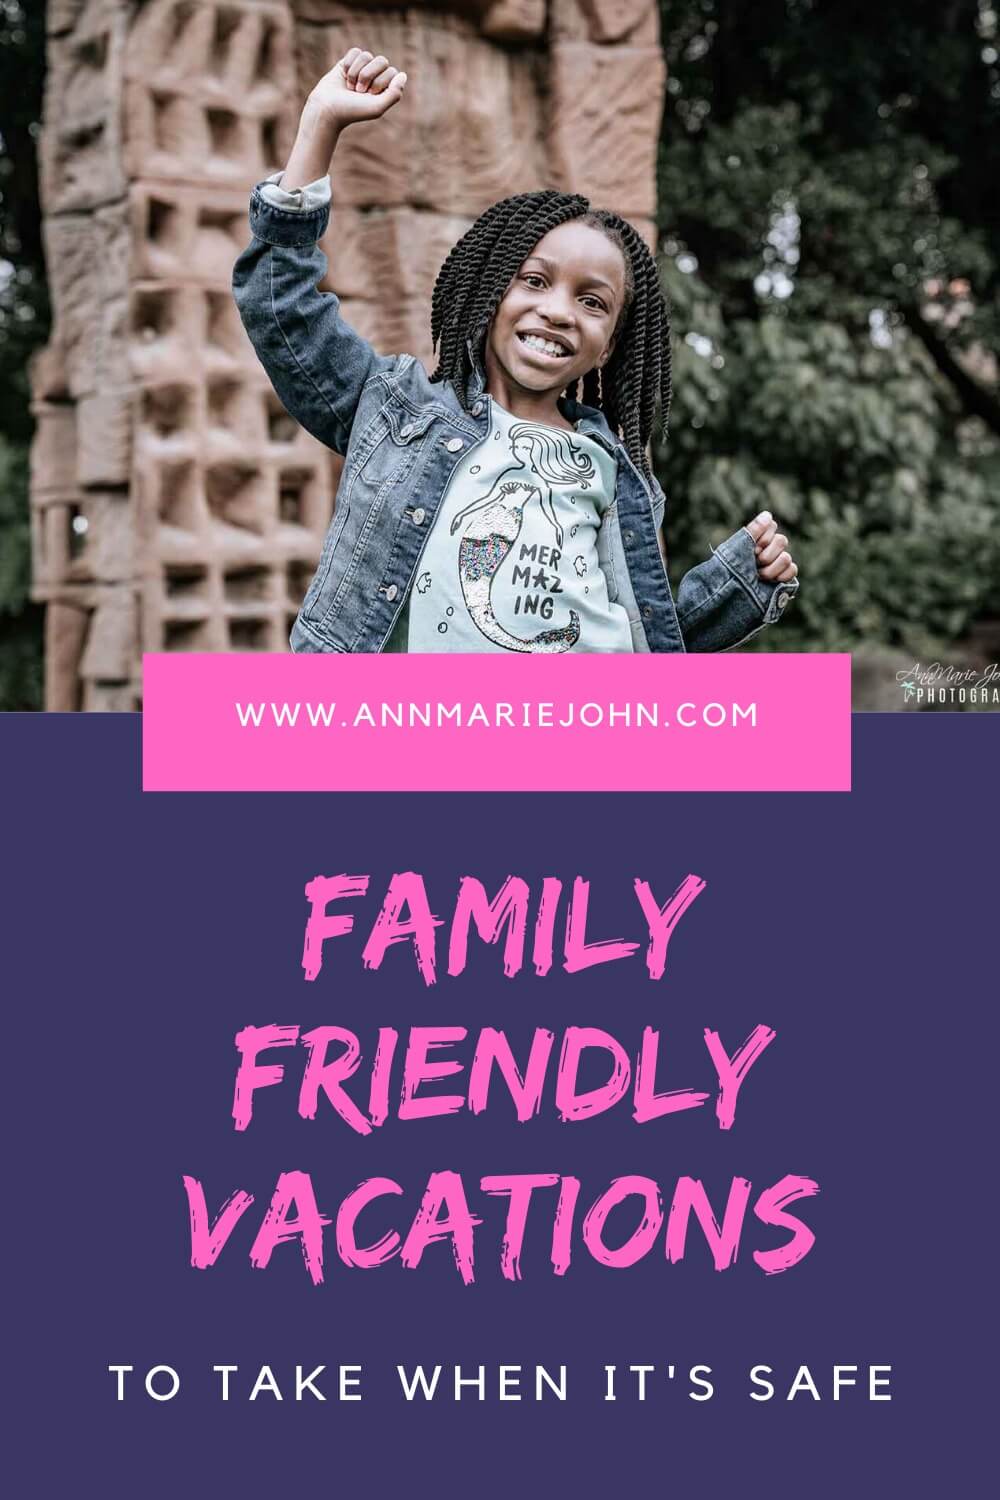 Family Friendly Vacations to Take When It’s Safe